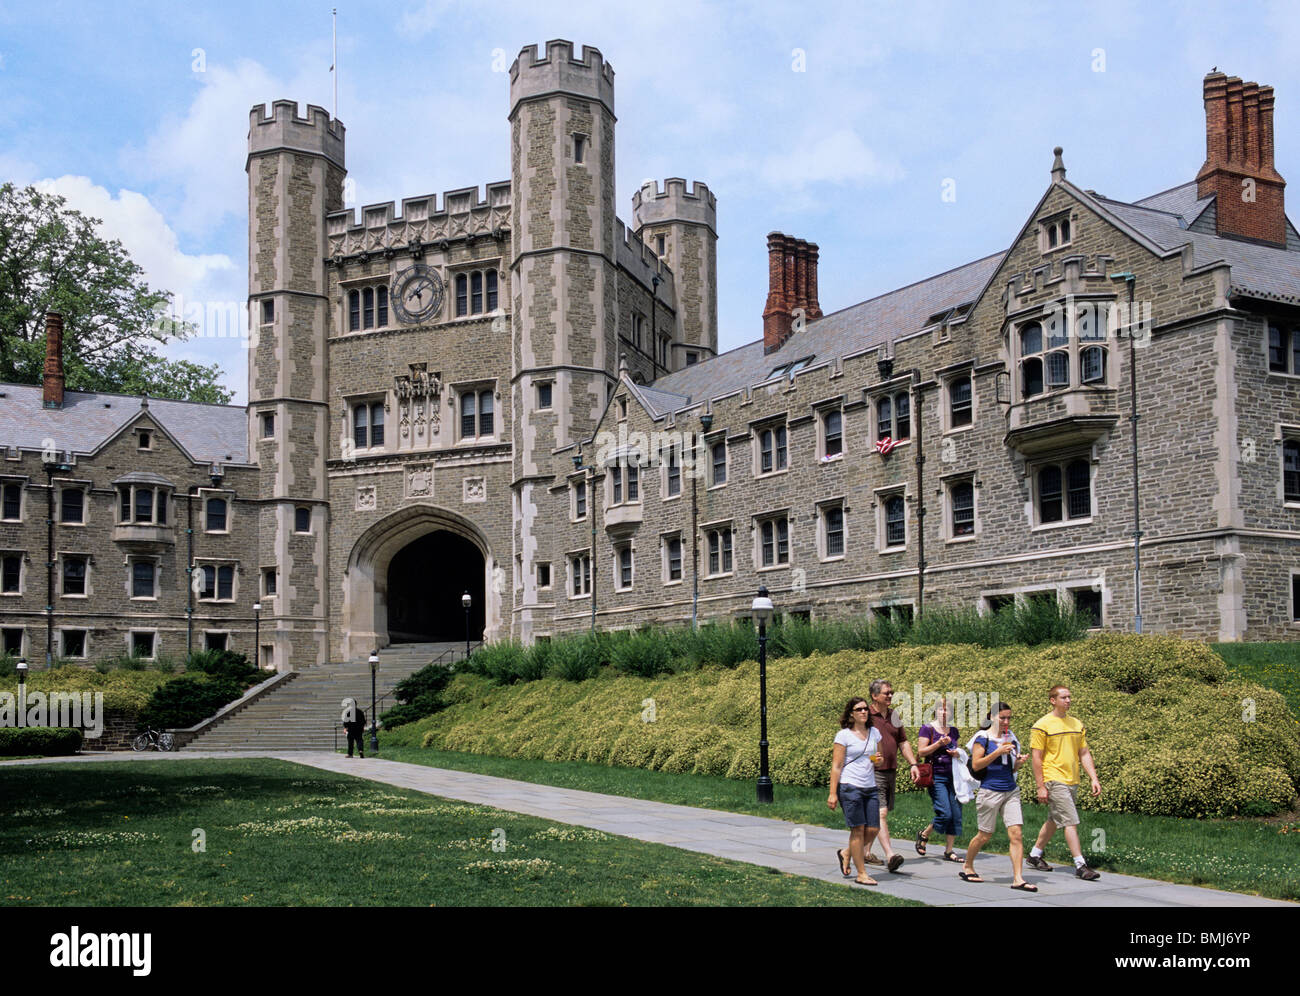 Princeton University campus, Blair Hall. Students walking to classes on campus. Princeton is an Ivy league university in New Jersey USA Stock Photo